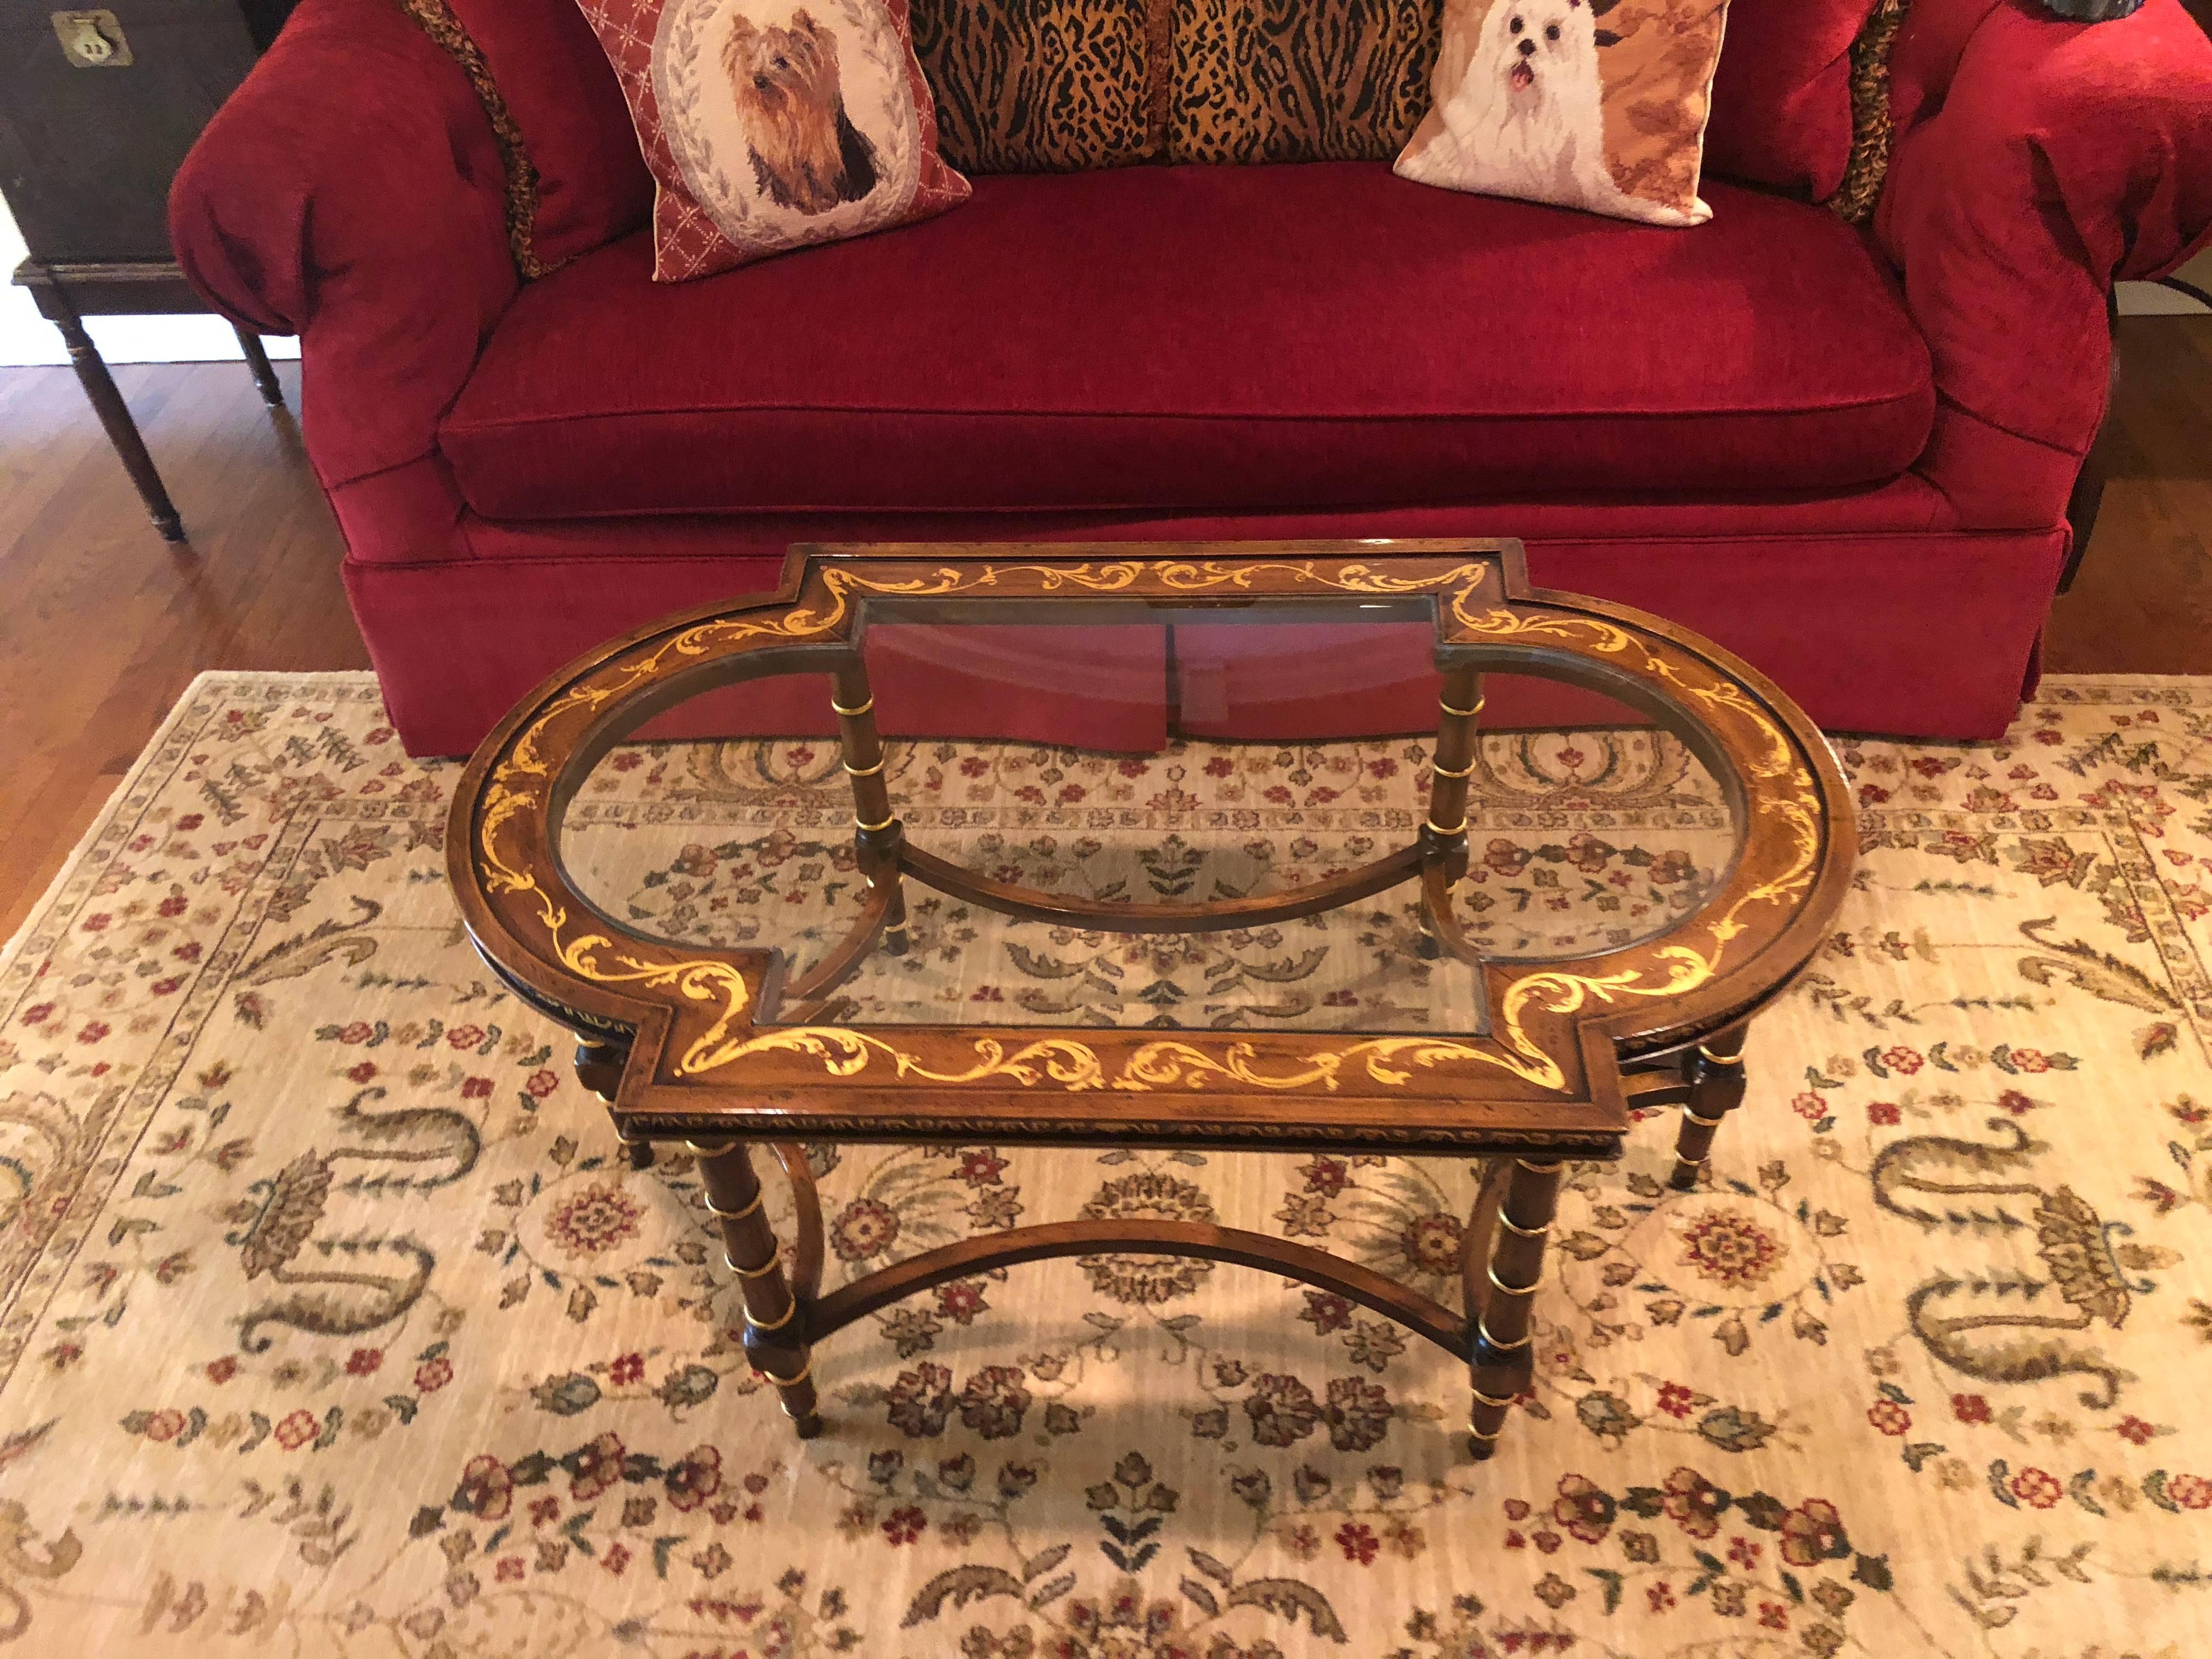 20th Century Francesco Molon Coffee Table by Gimme Furniture Co. Finely Inlaid